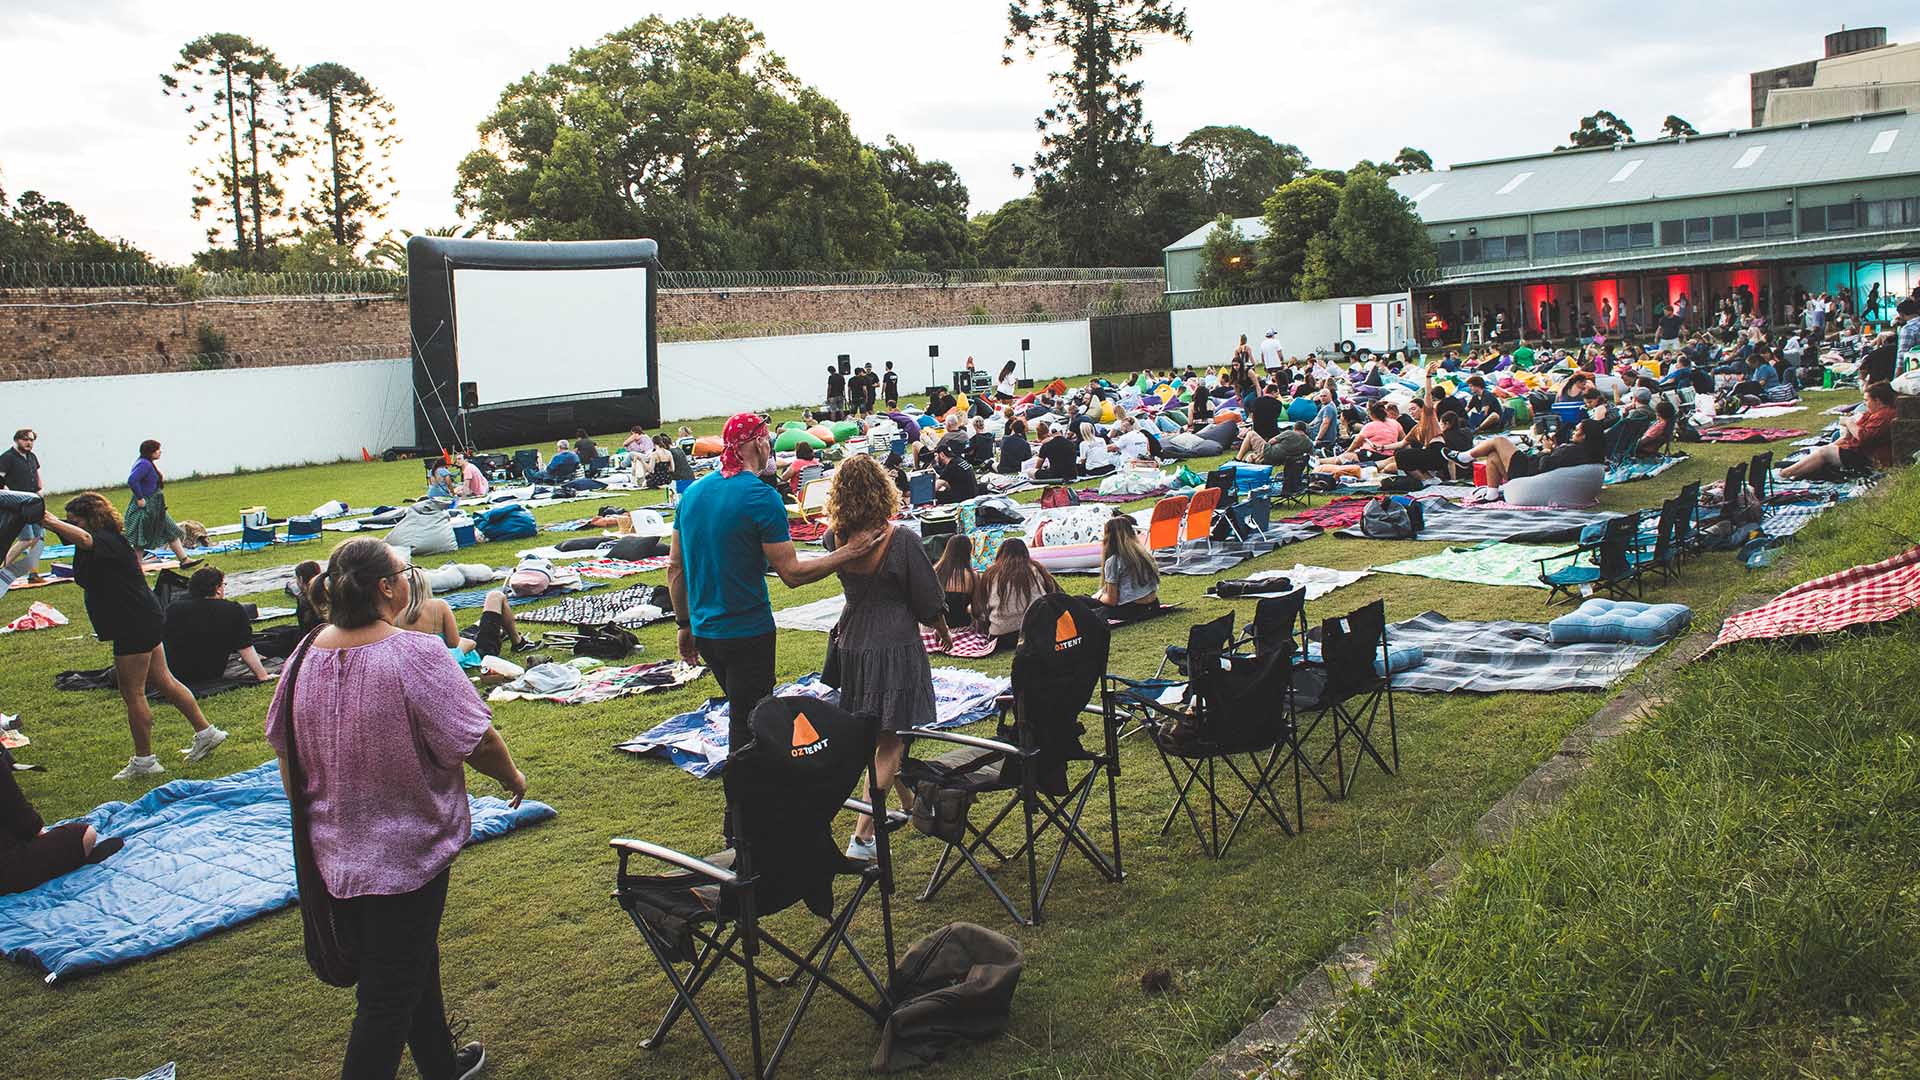 Sydney's Spooky Movie Screenings at Parramatta Gaol and Camperdown Cemetery Will Return From November